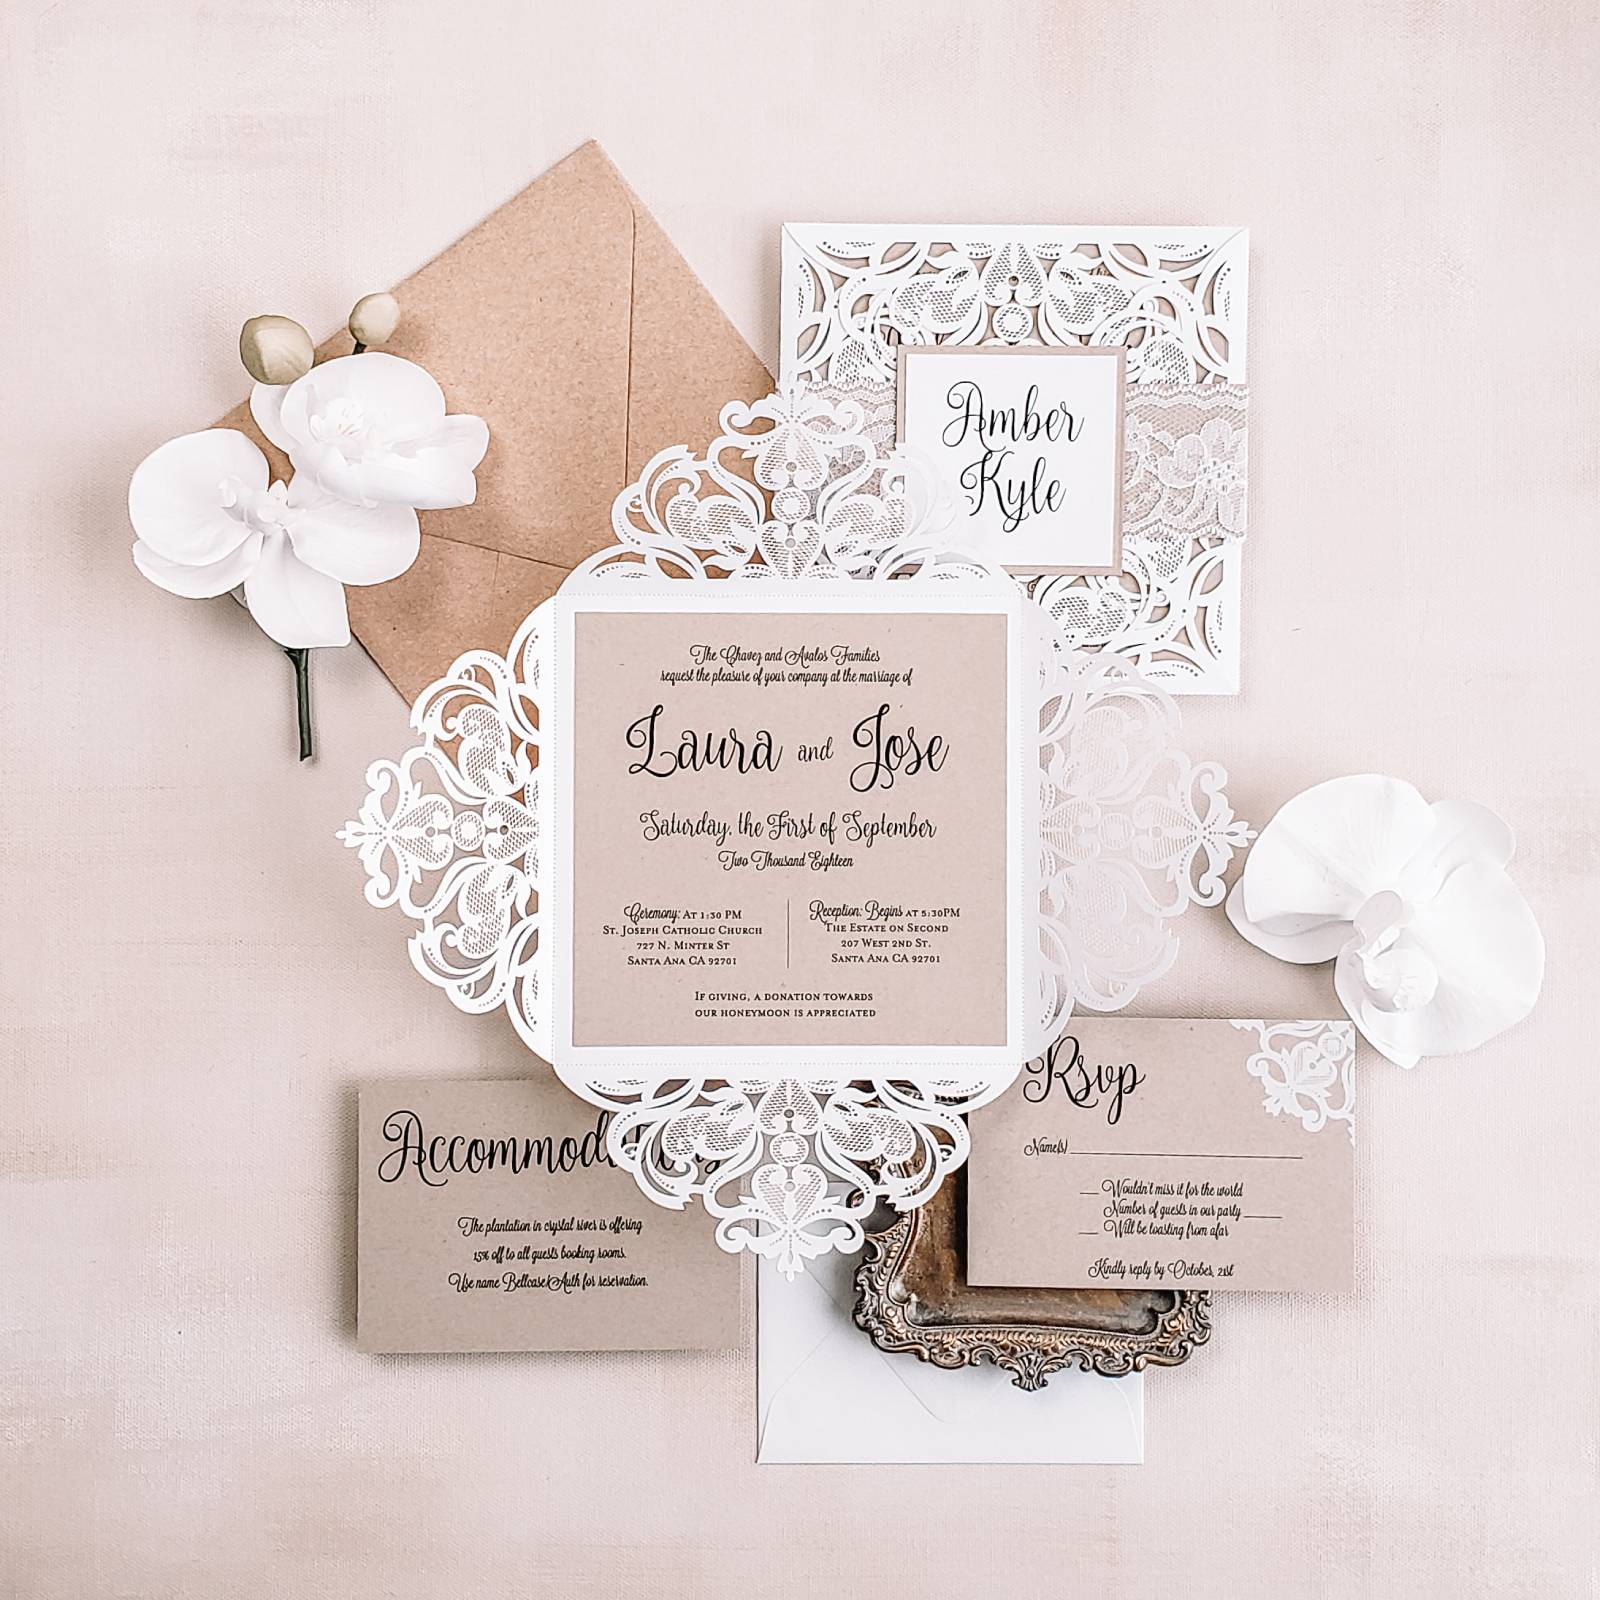 [vc_row][vc_column][vc_column_text]Purchase this listing to get a sample of our Bergamot wedding invitation suite.

The sample includes:

• 5.9